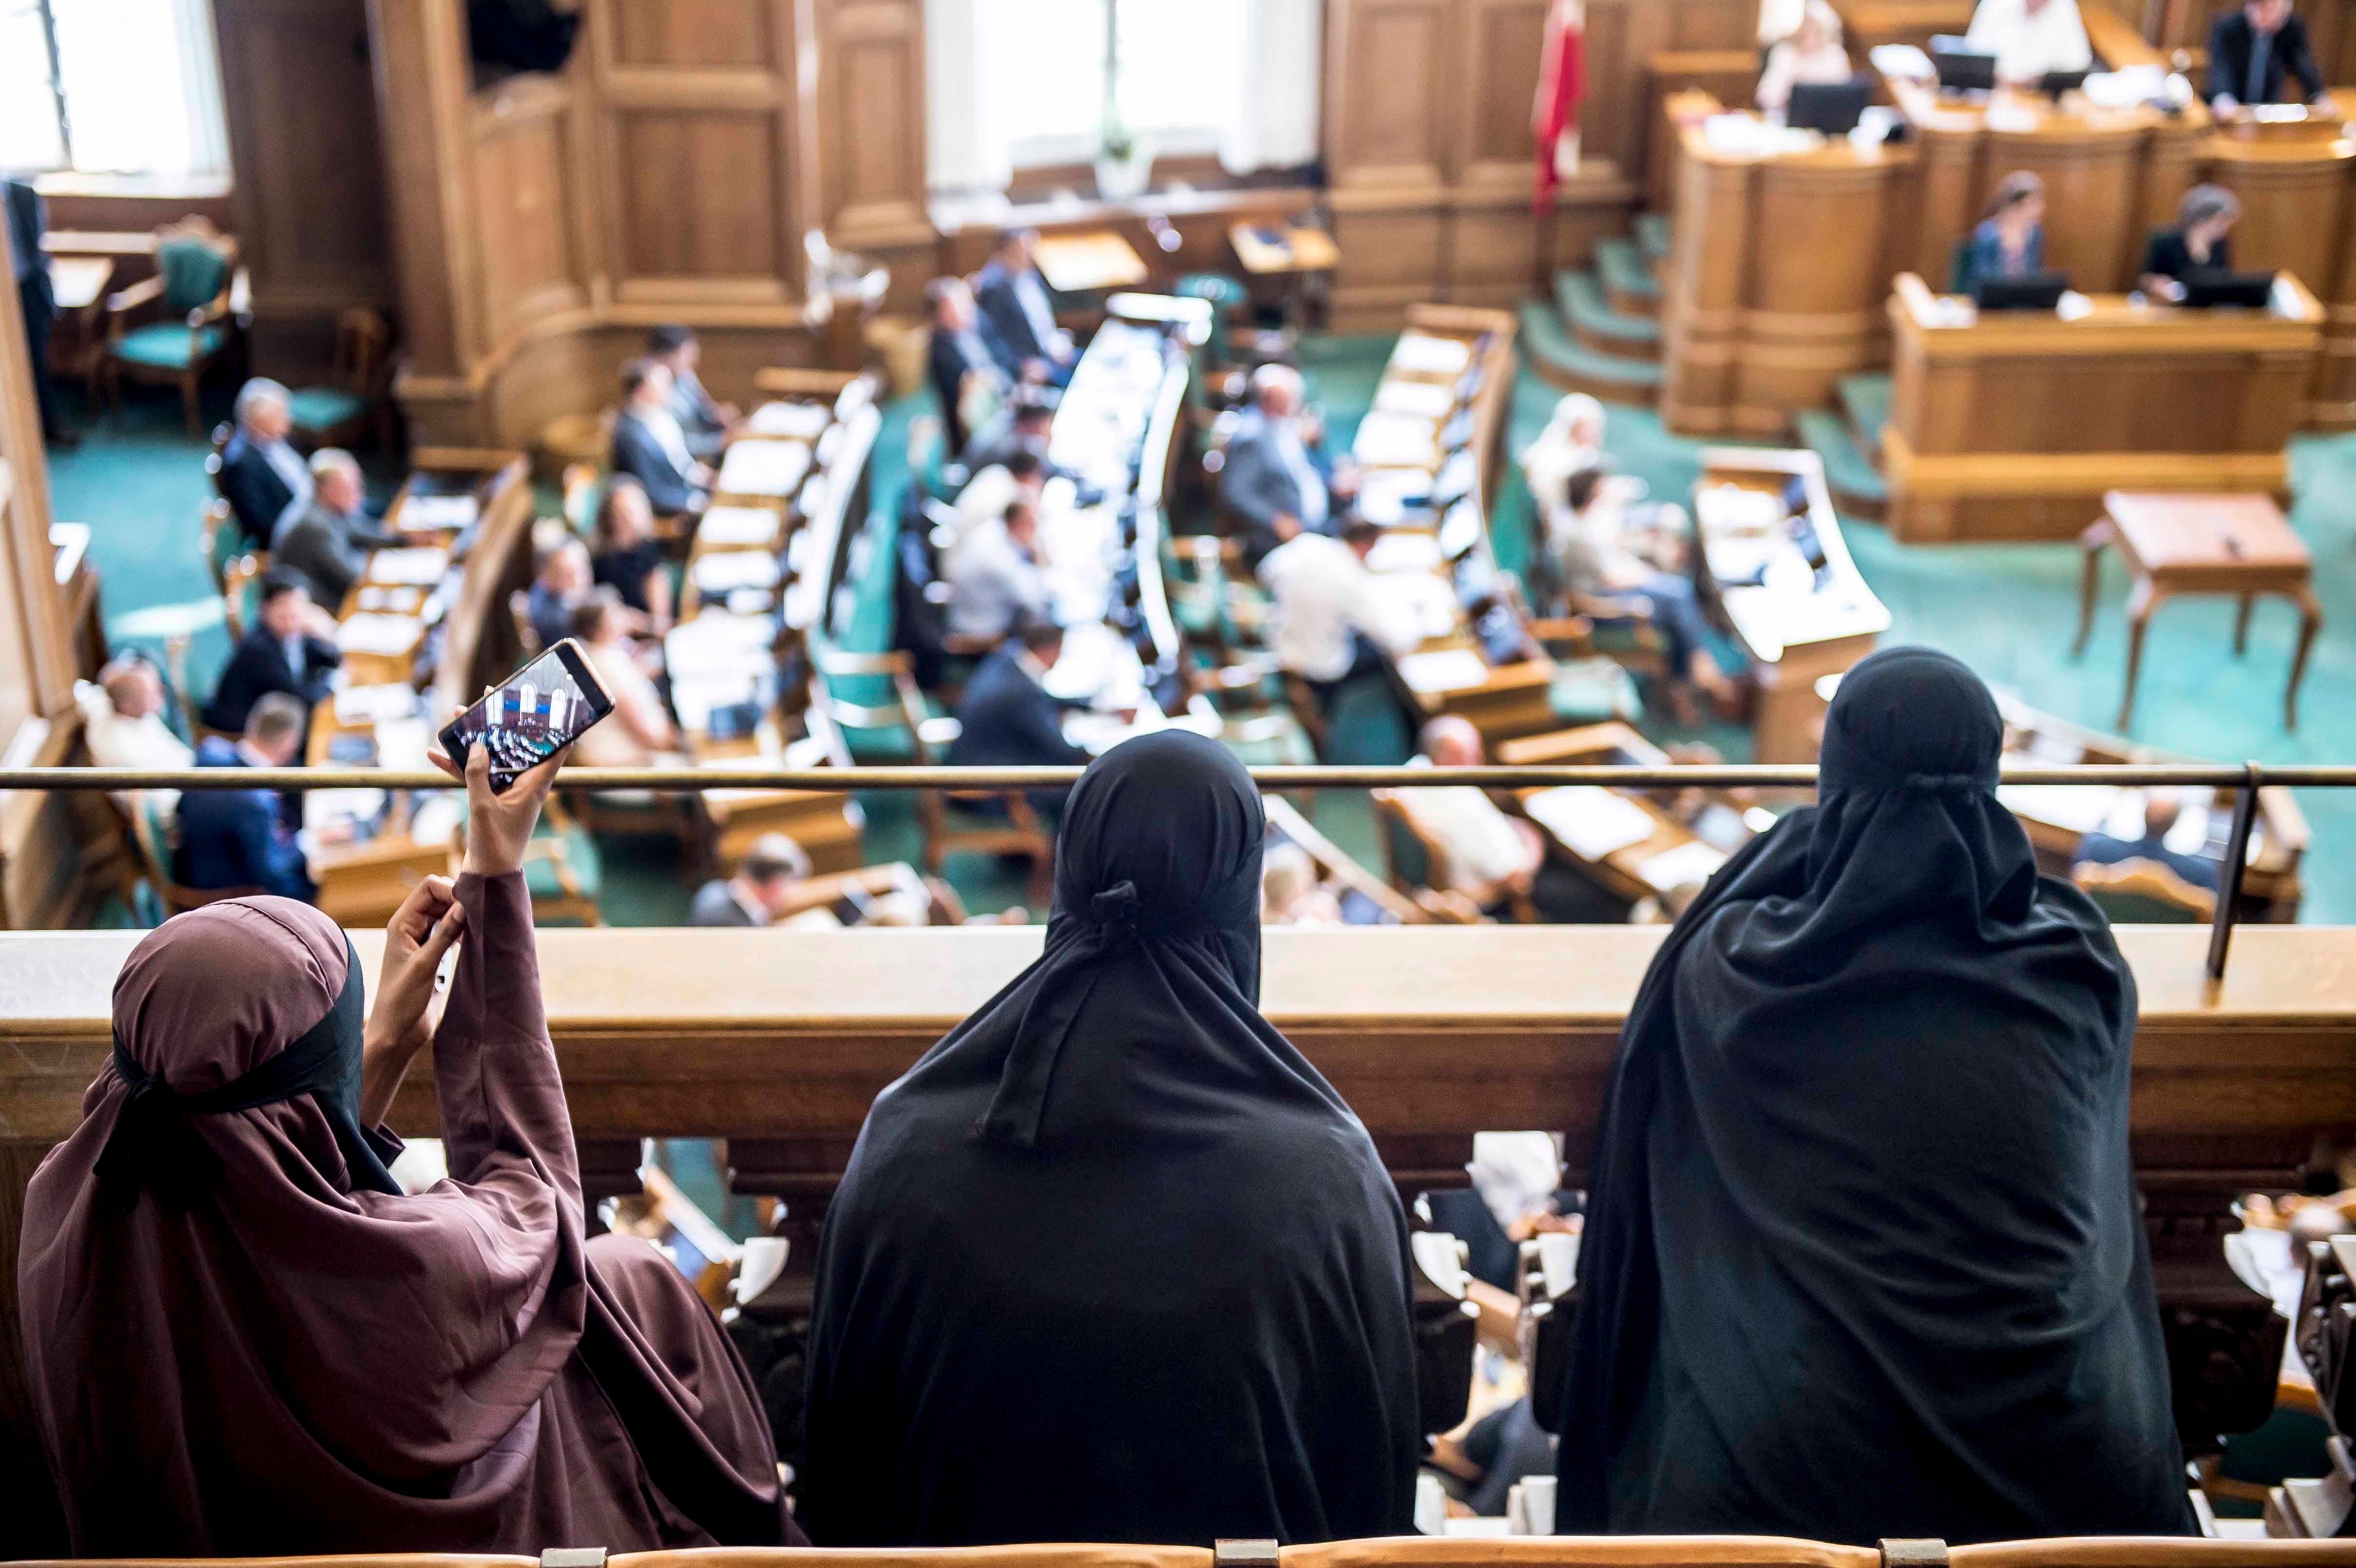 Women wearing the Islamic veil, the niqab, sit in the audience seats of the Danish Parliament, at Christiansborg Castle, in Copenhagen, Denmark, May 31, 2018. Denmark joined some other European countries in deciding to ban garments that cover the face, in